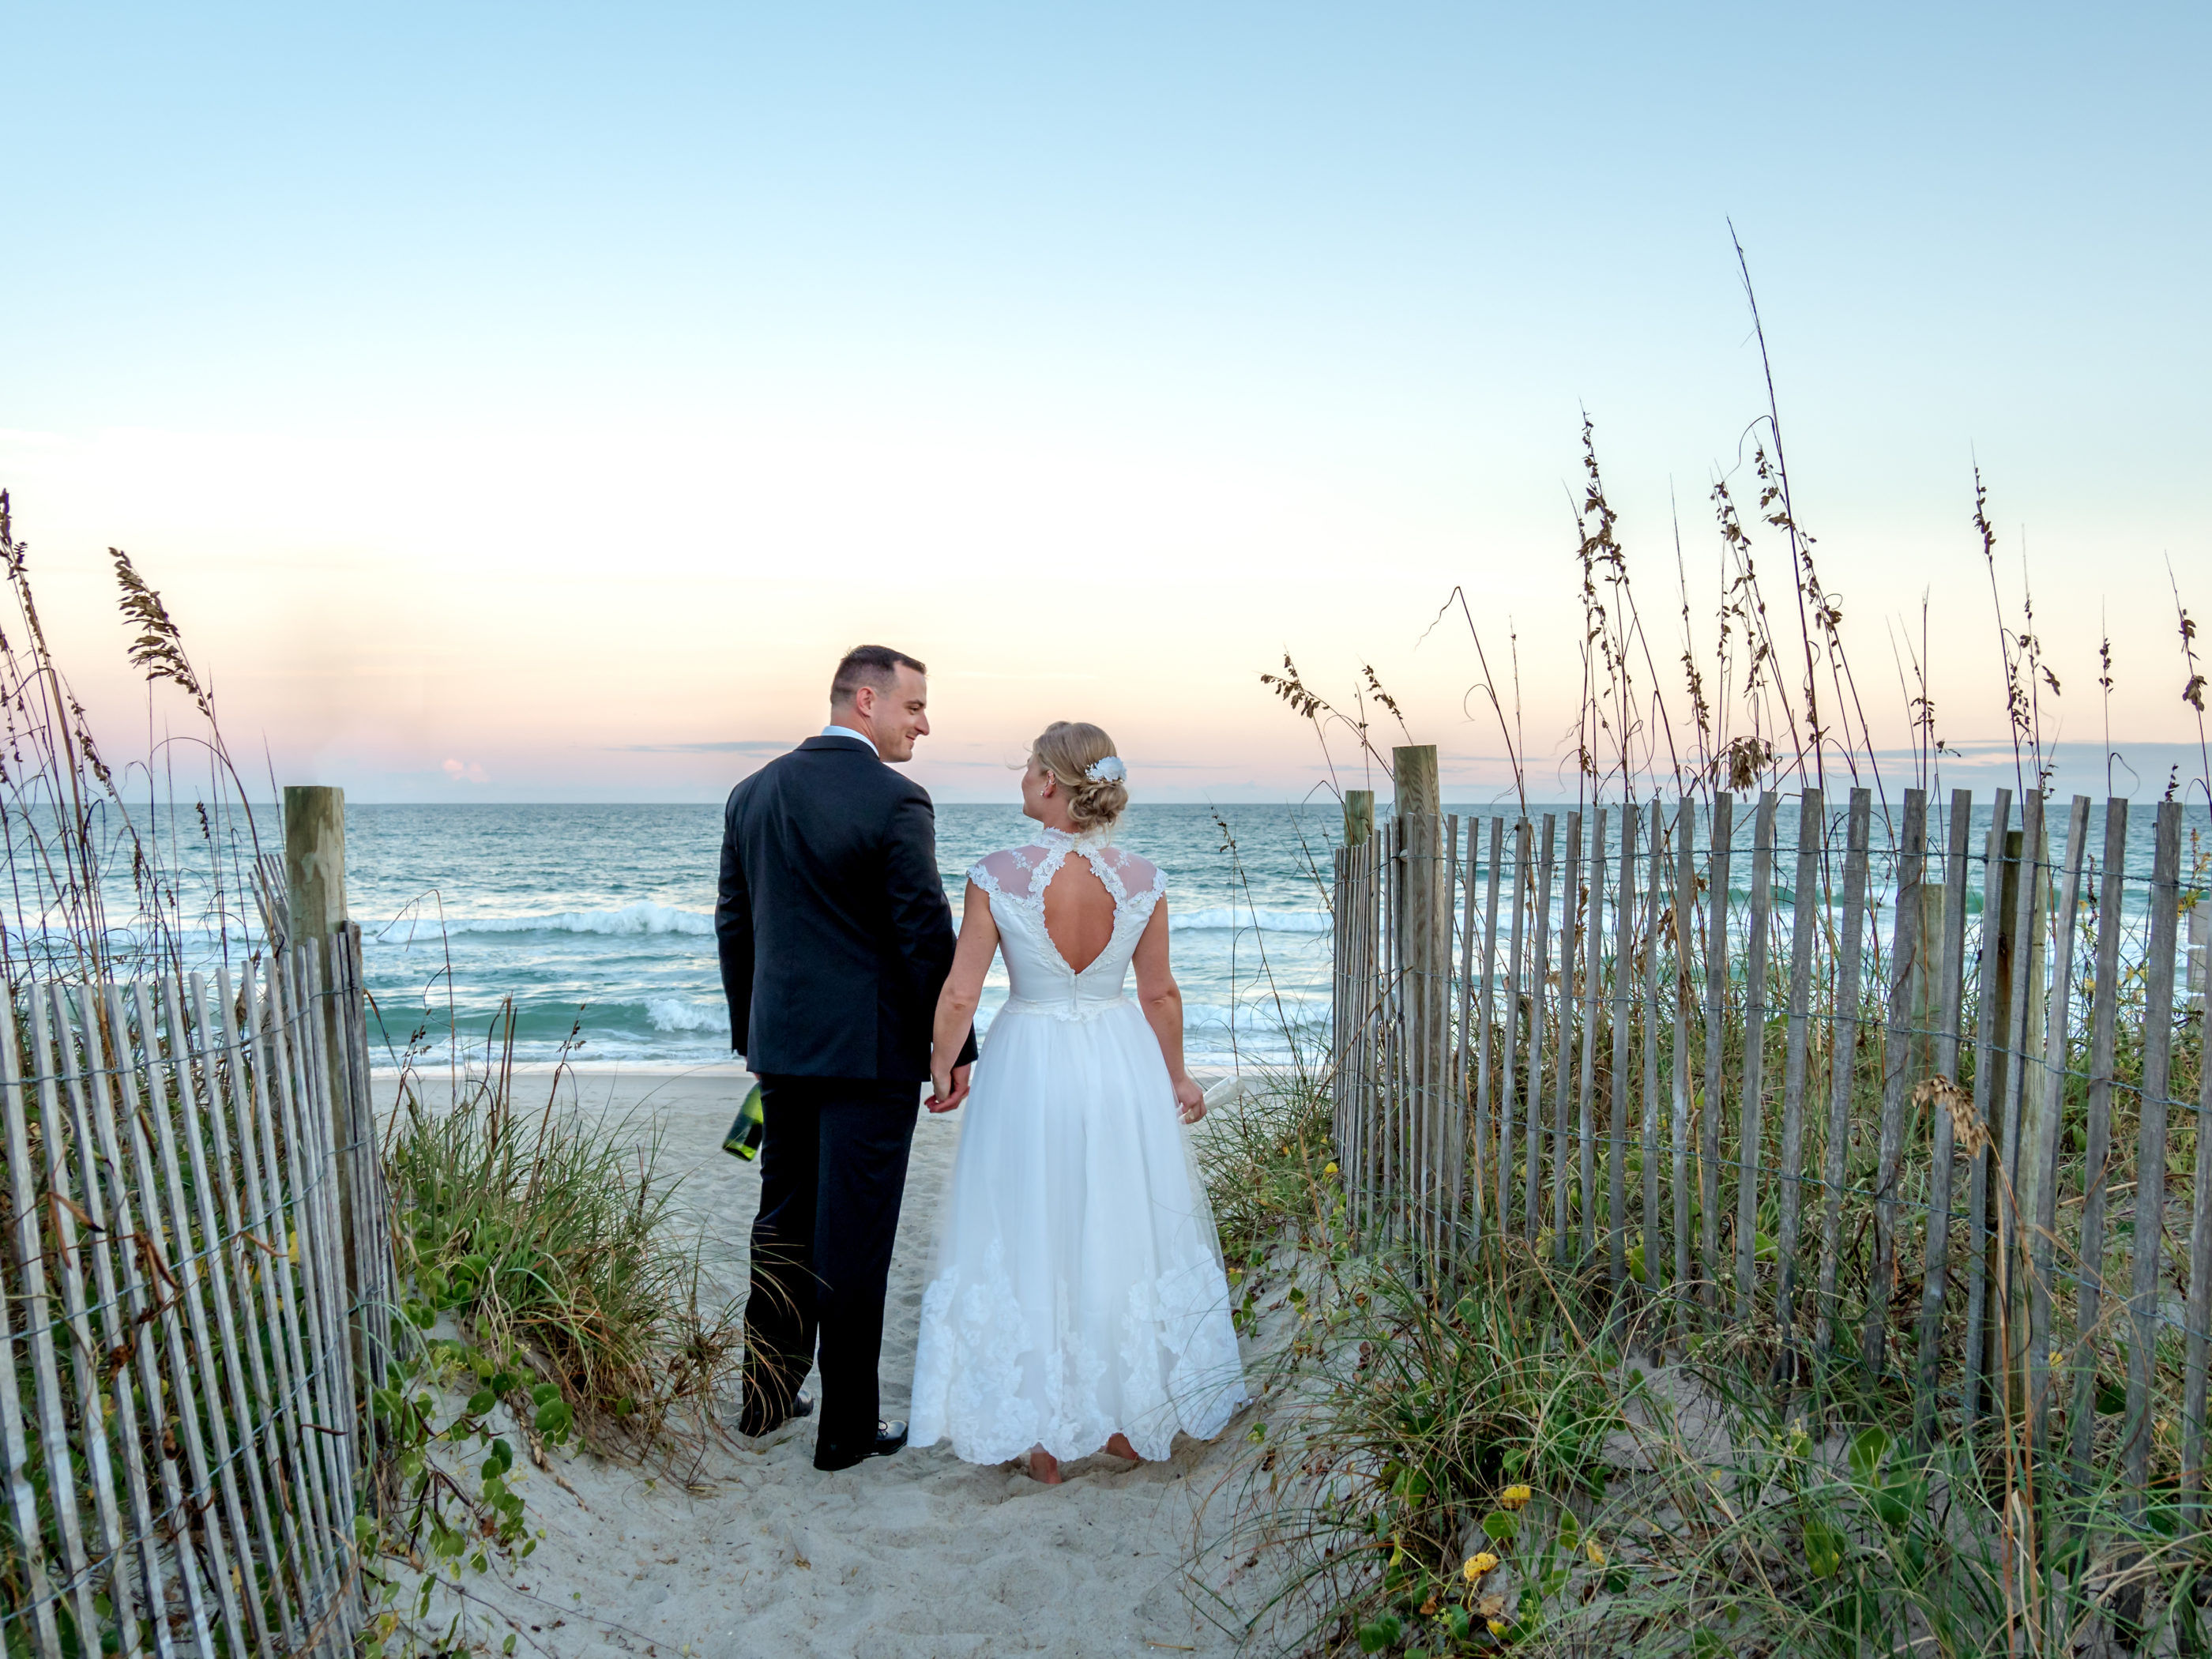 bride and groom looking at each other lovingly at the beach during sunset